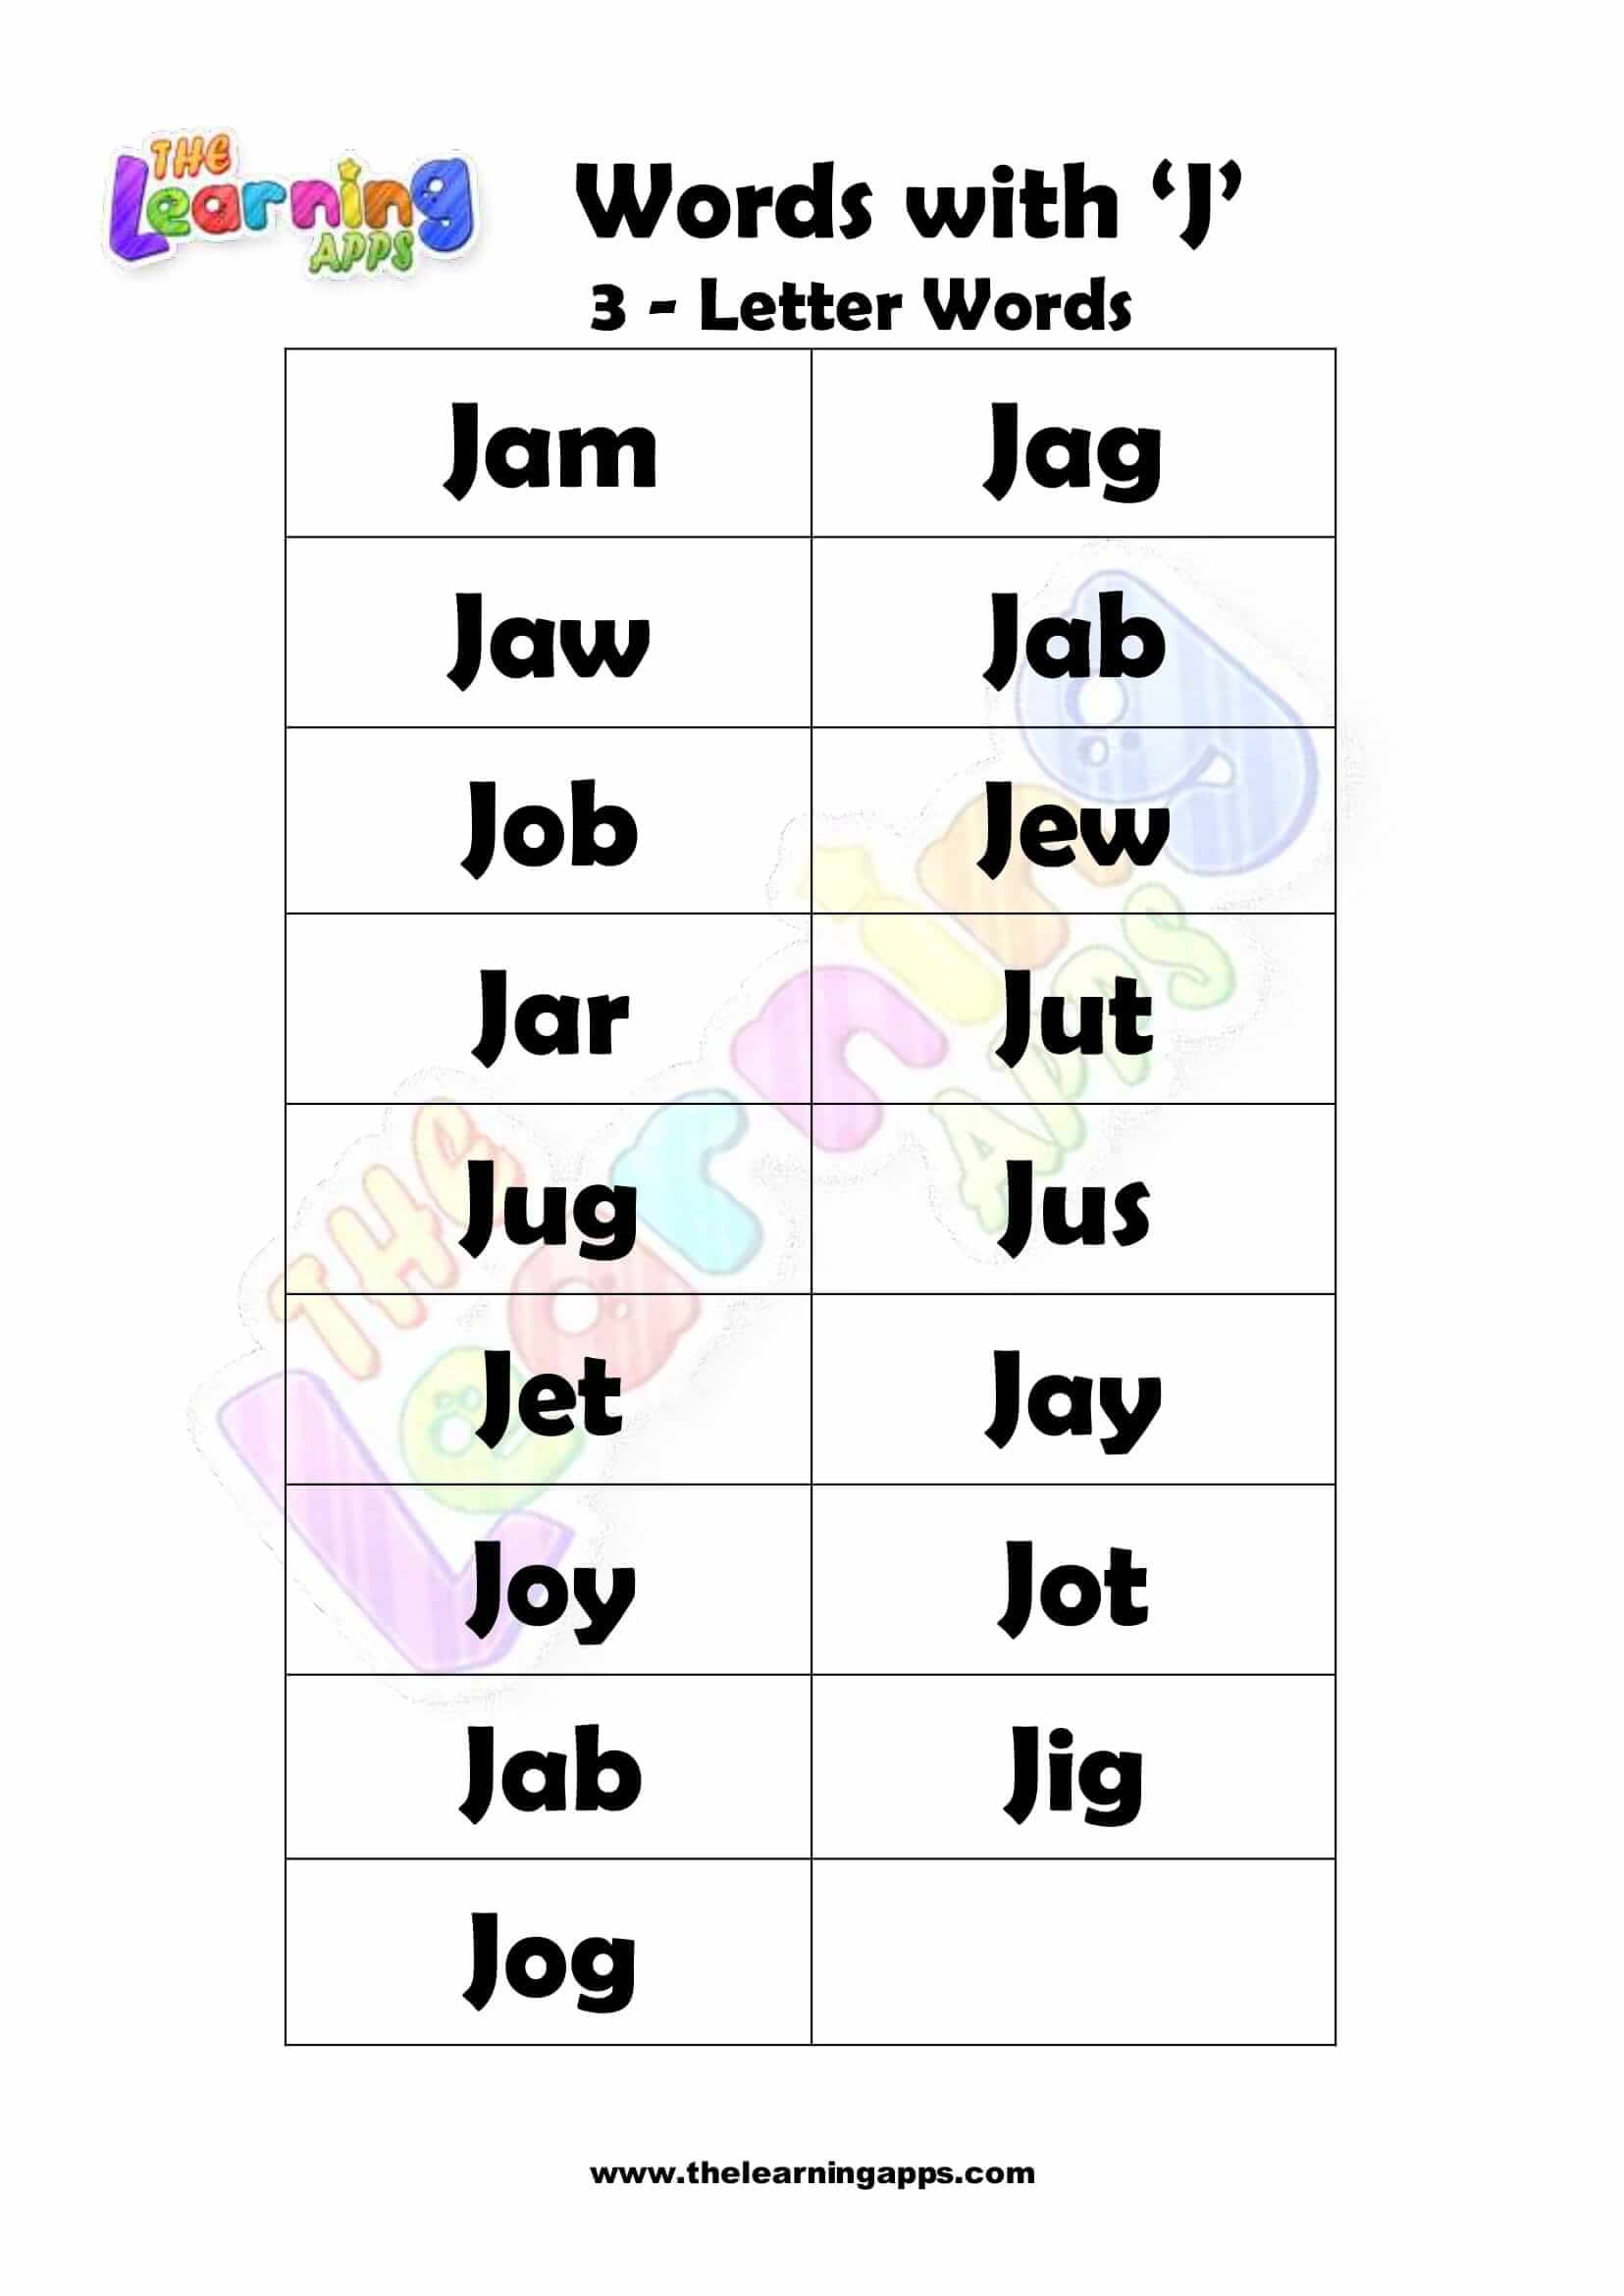 3 LETTER WORD STARTING WITH J